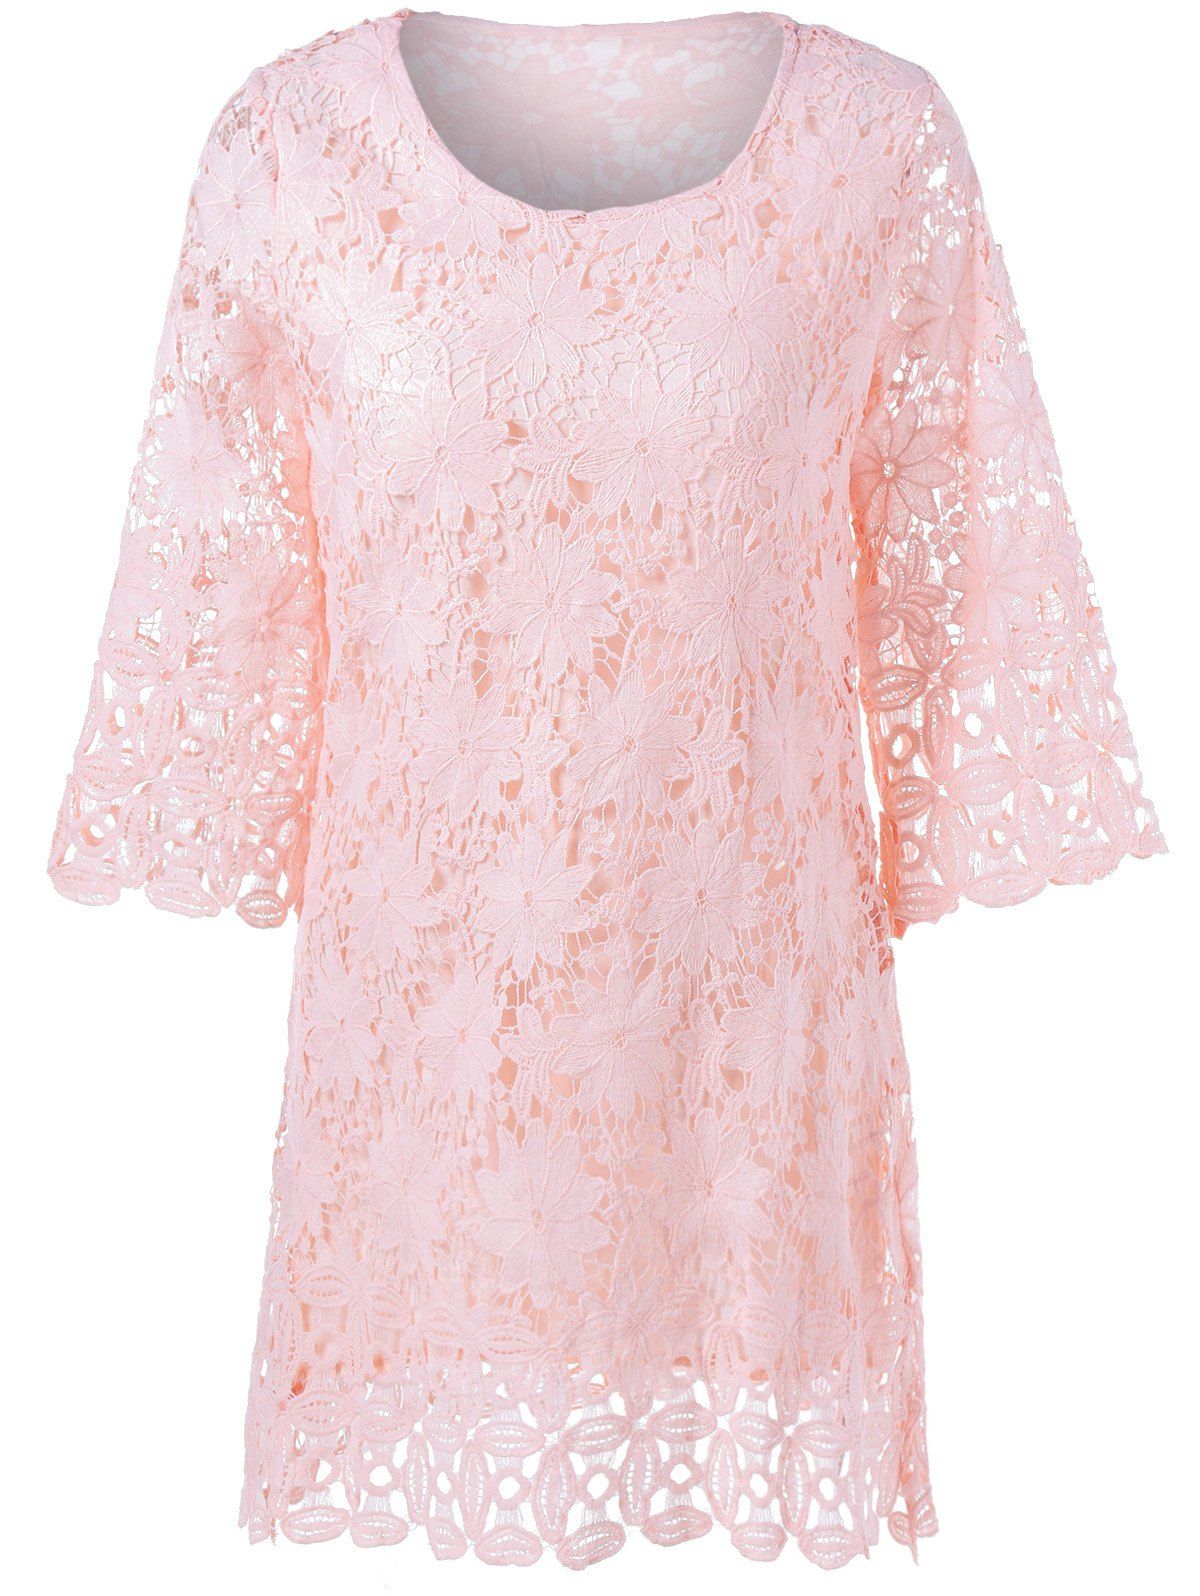 [41% OFF] 2020 Sheer Lace Overlay Dress In PINK | DressLily